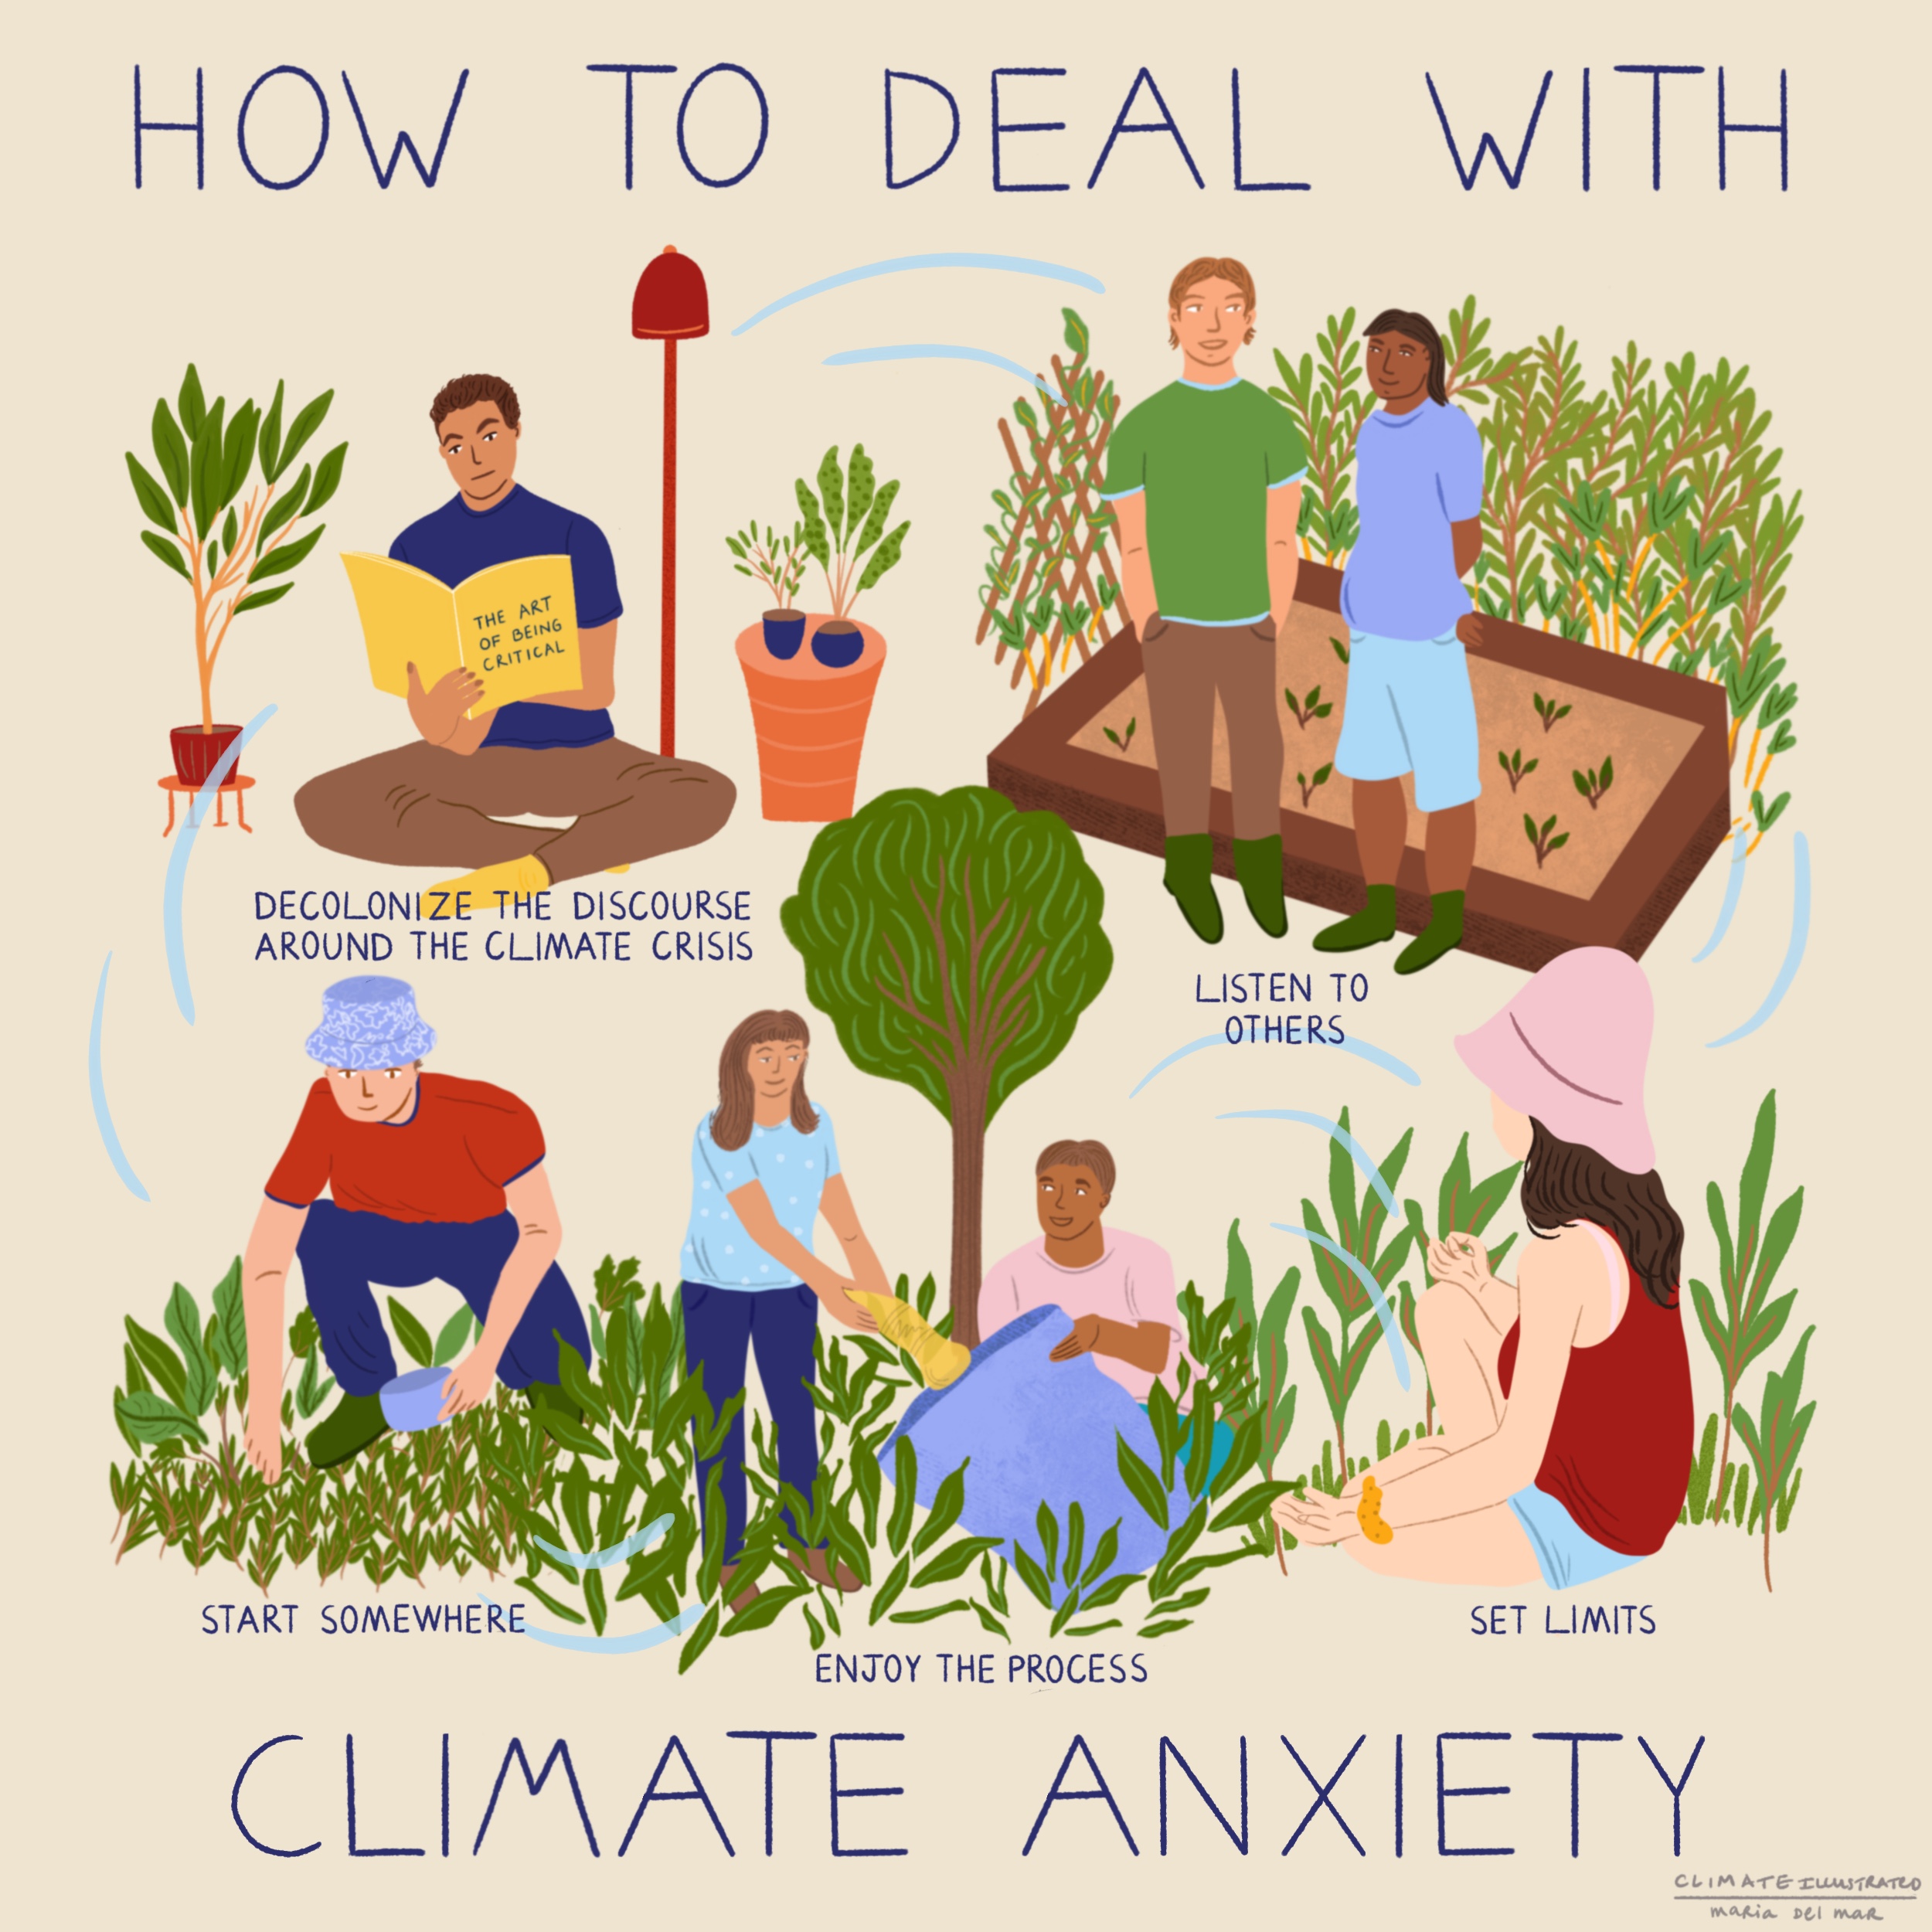 Decolonizing ideas about climate anxiety